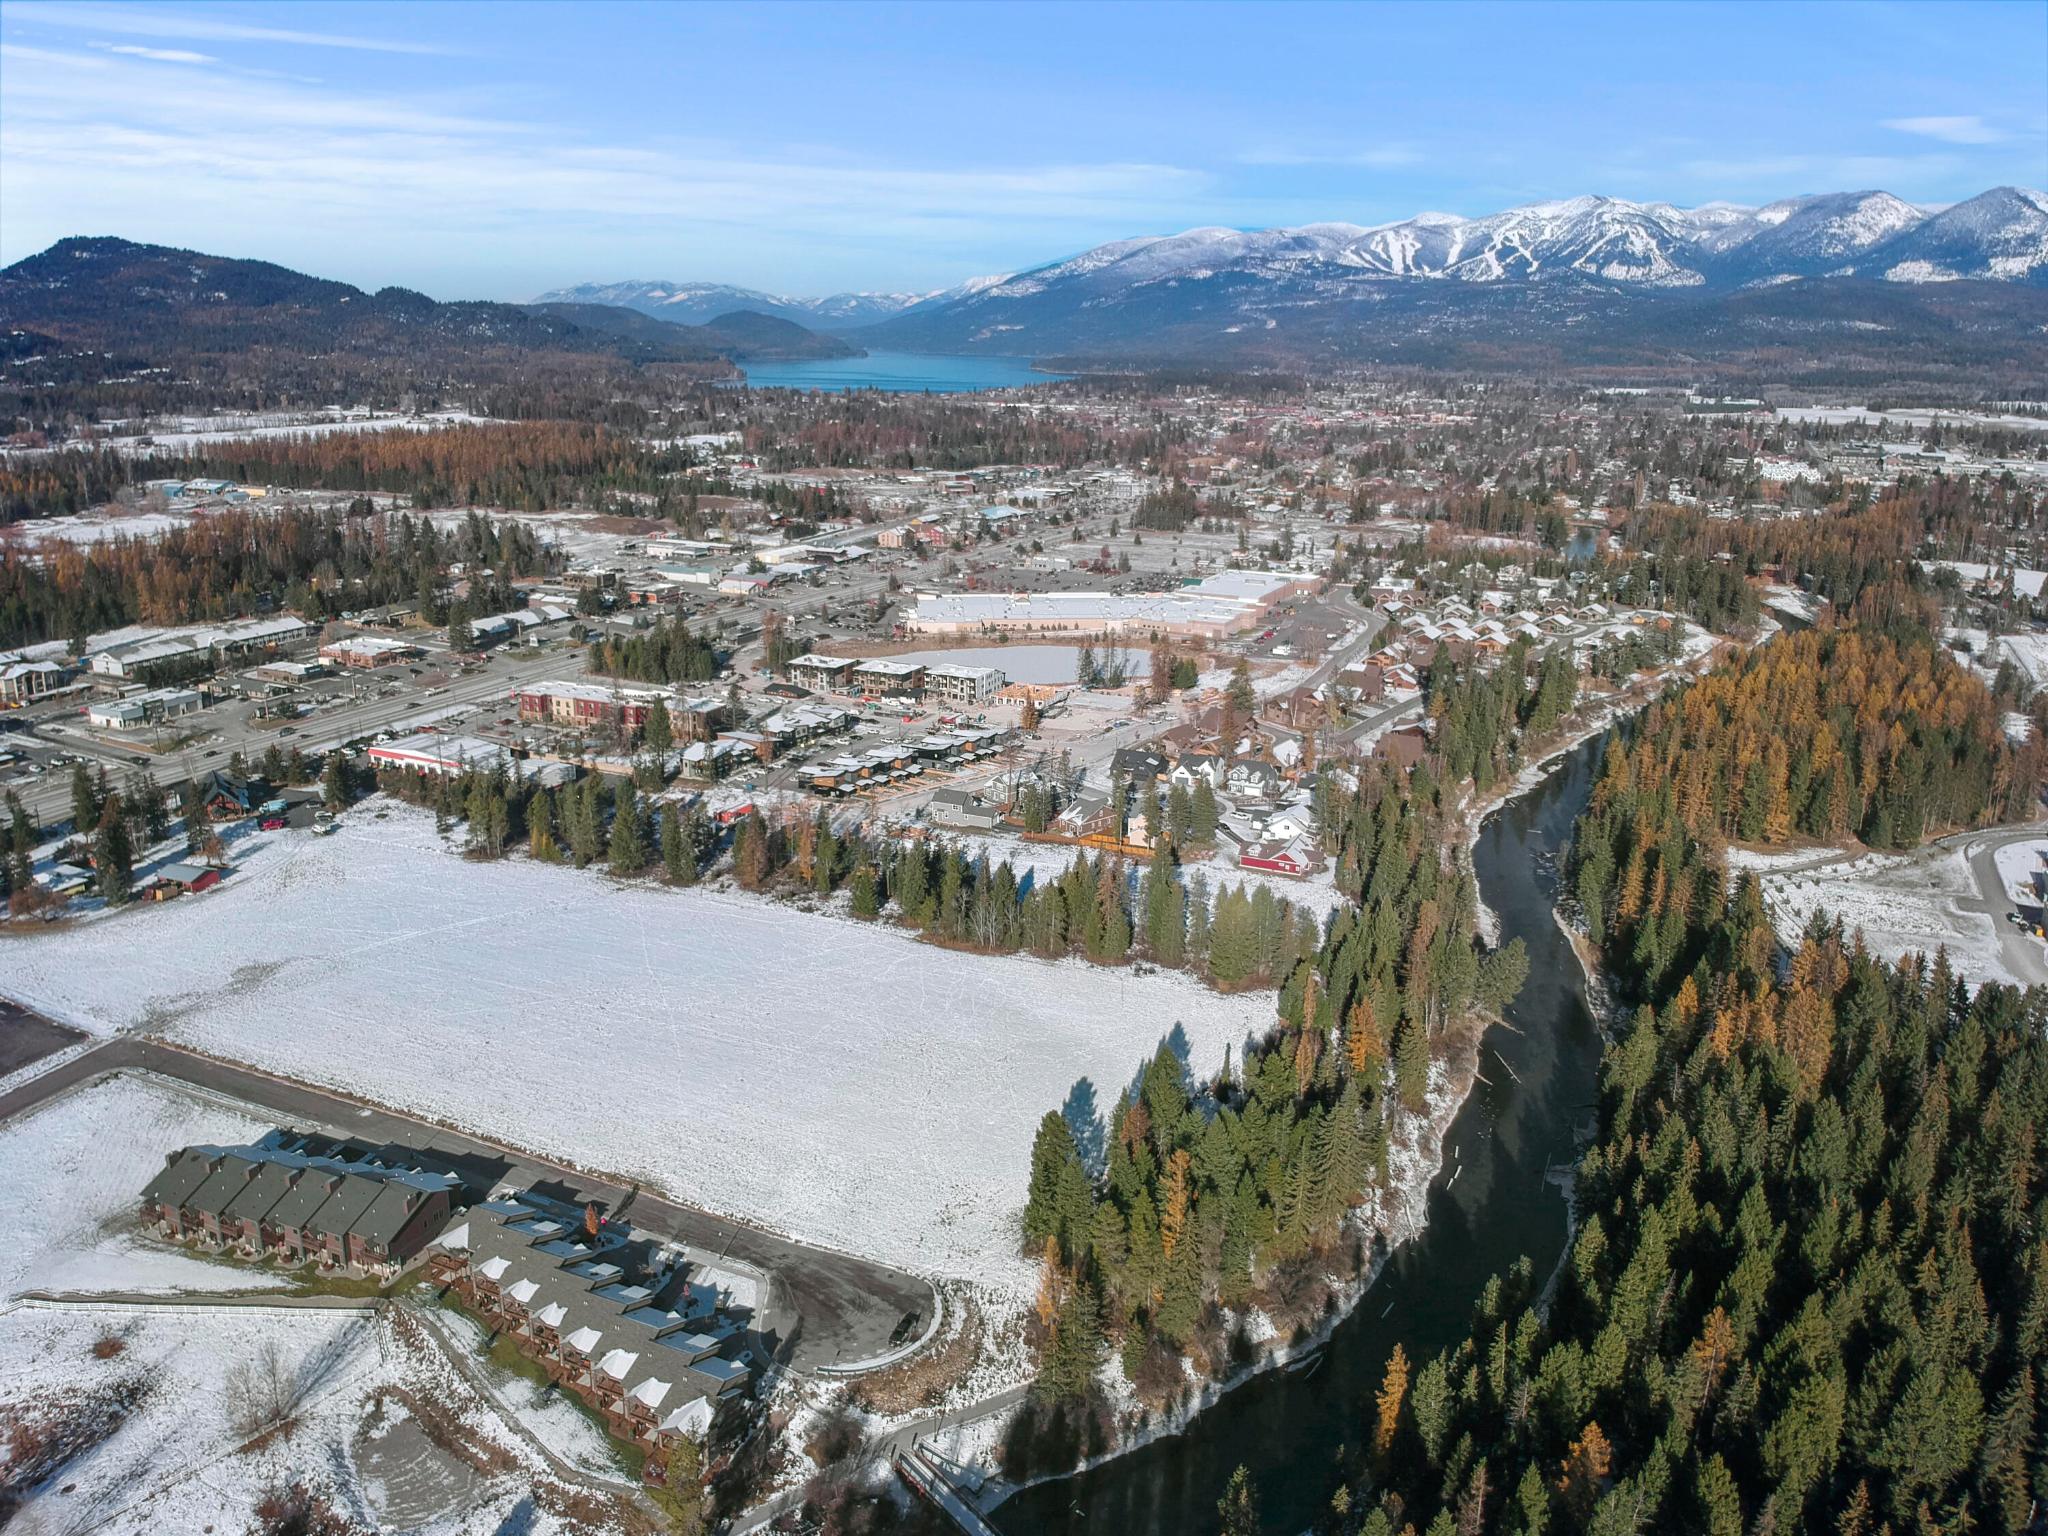 Welcome to Snowy Mountain, Whitefish's newest premier planned development community, along the banks of the gorgeous Whitefish River. With 24 duplex townhome lots, future homeowners will be well positioned to access all of Whitefish and the Flathead Valley. Lot 22 borders the Whitefish Riverwalk, with prime west-facing river views. Enjoy the nearby convenience of grocery stores and coffee shops. Downtown Whitefish, with its vibrant shopping and dining scene, is down the road, while the Ski Resort is 18 minutes to the Base Lodge. Construction begins this spring with a projected early Fall completion. Contact Kaleb Retz (406-546-8987) or your Real Estate Professional.